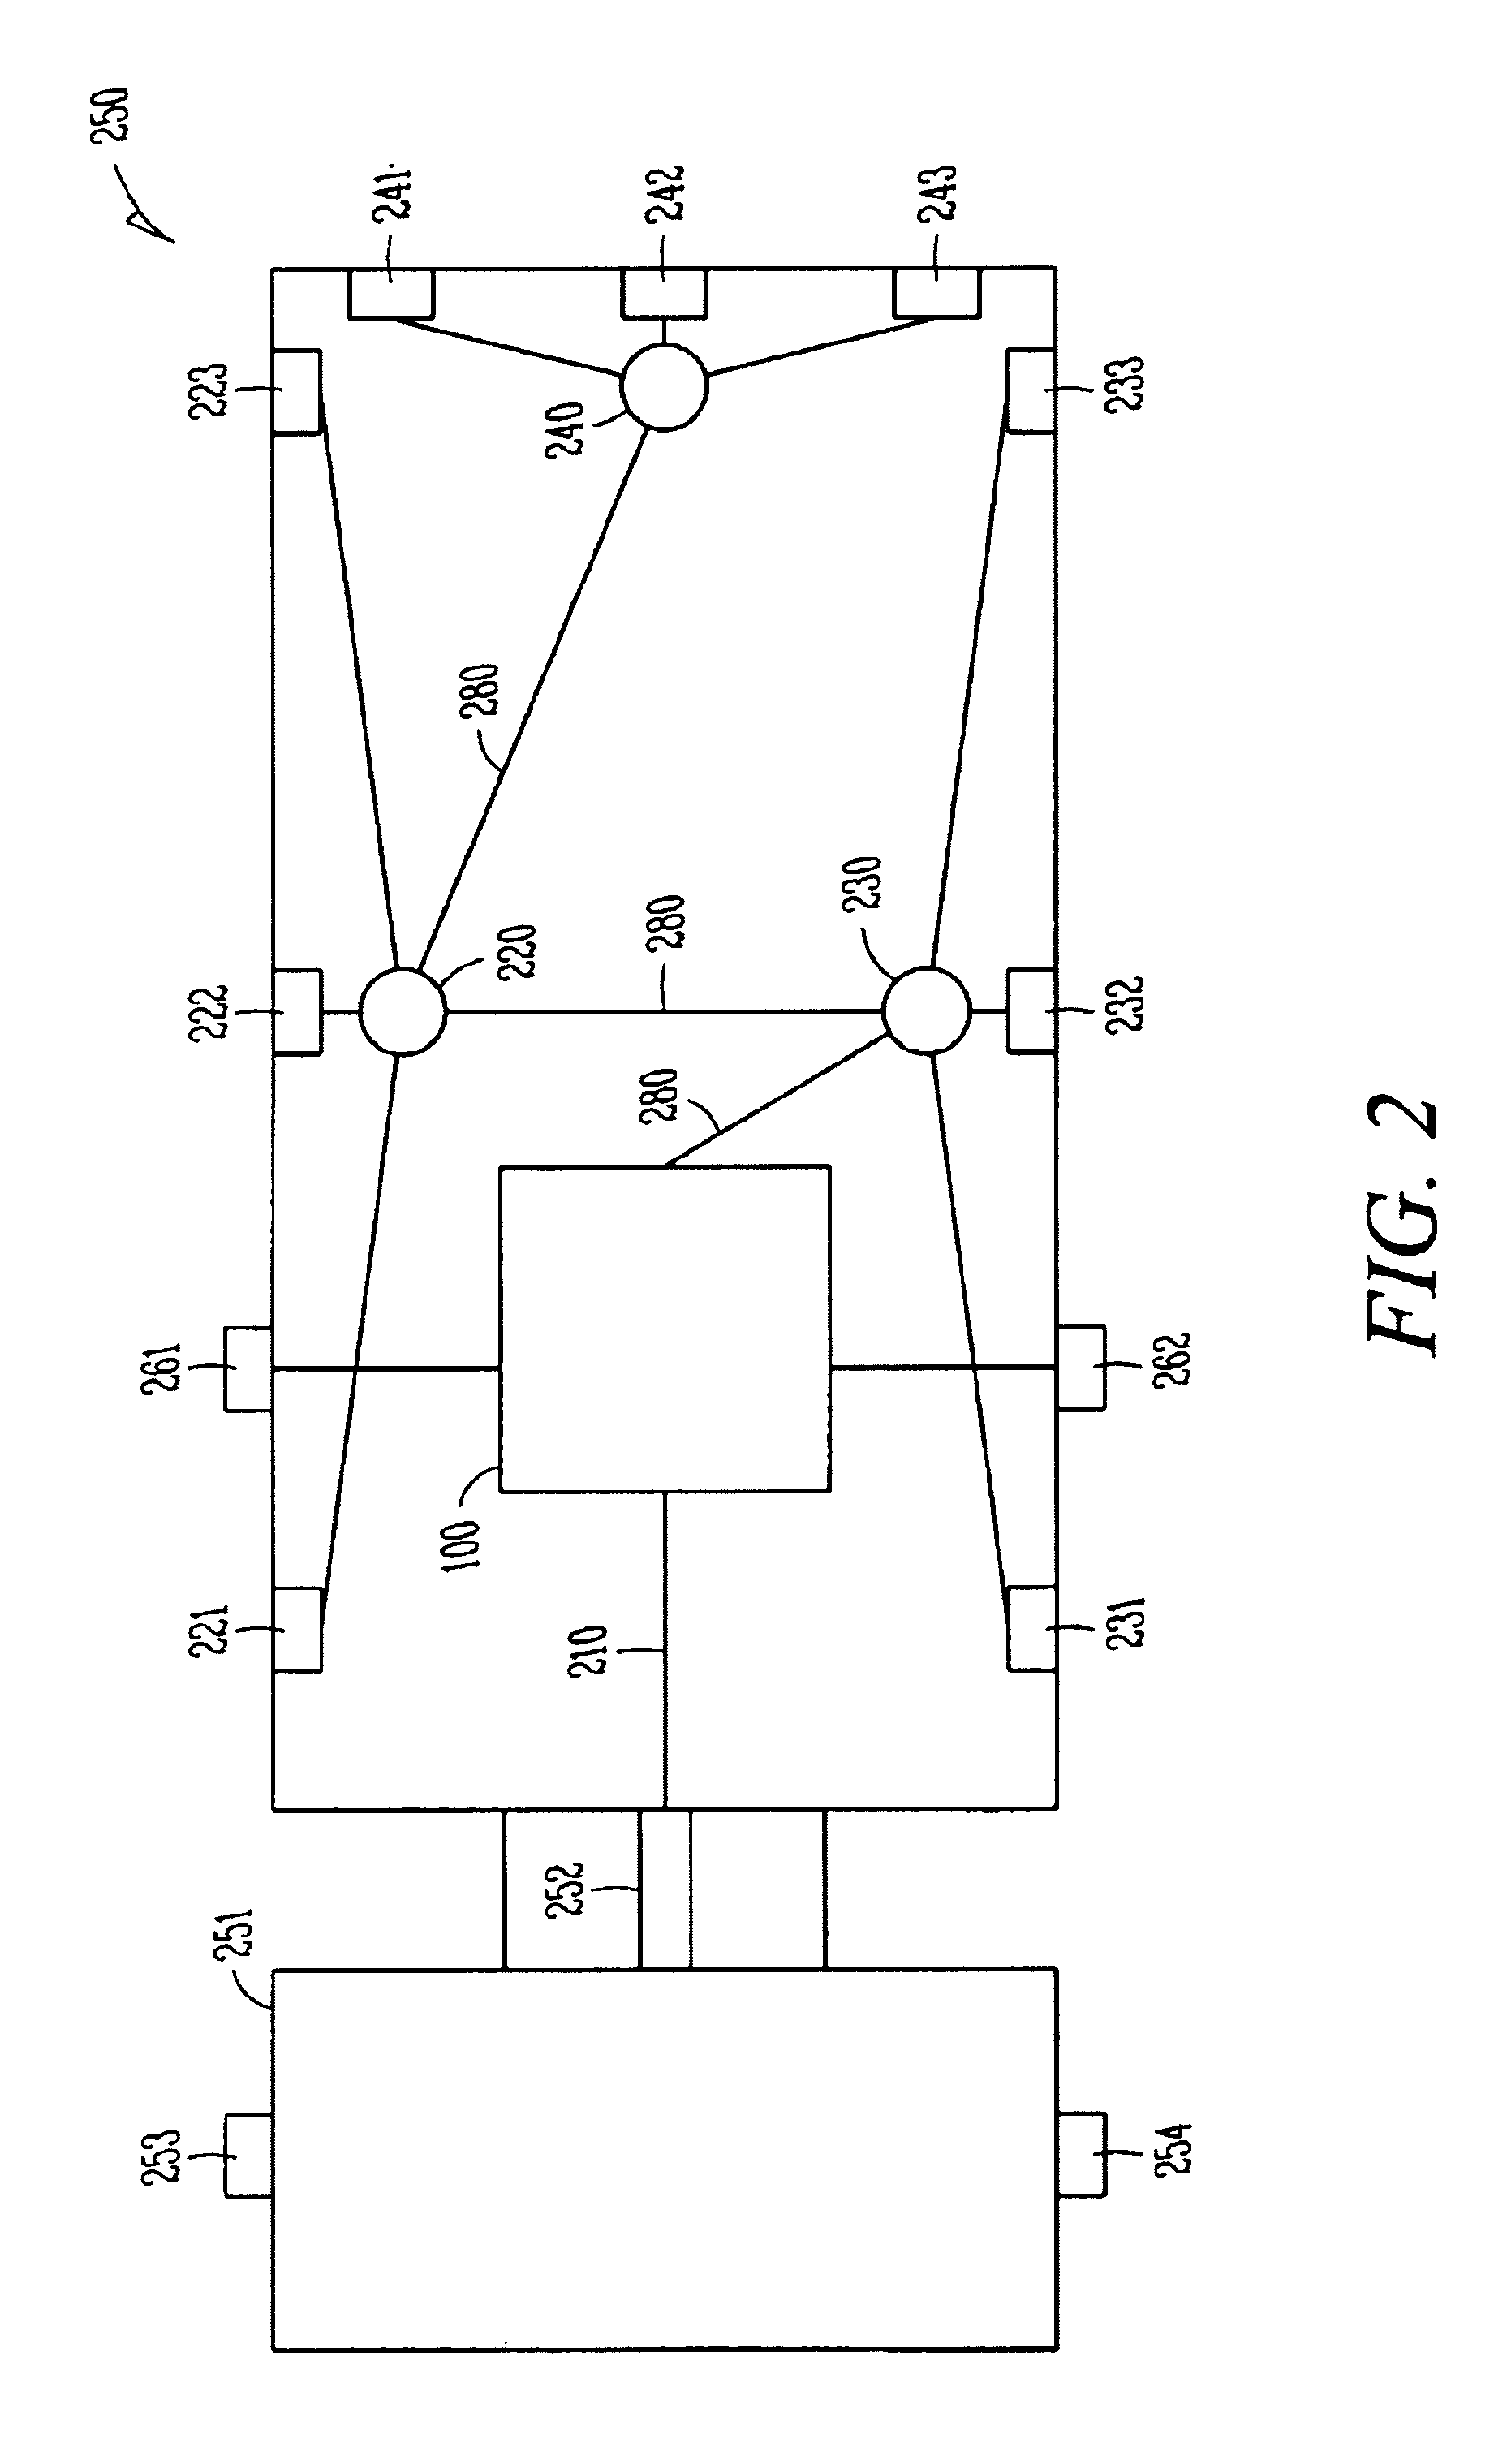 Trailer based collision warning system and method